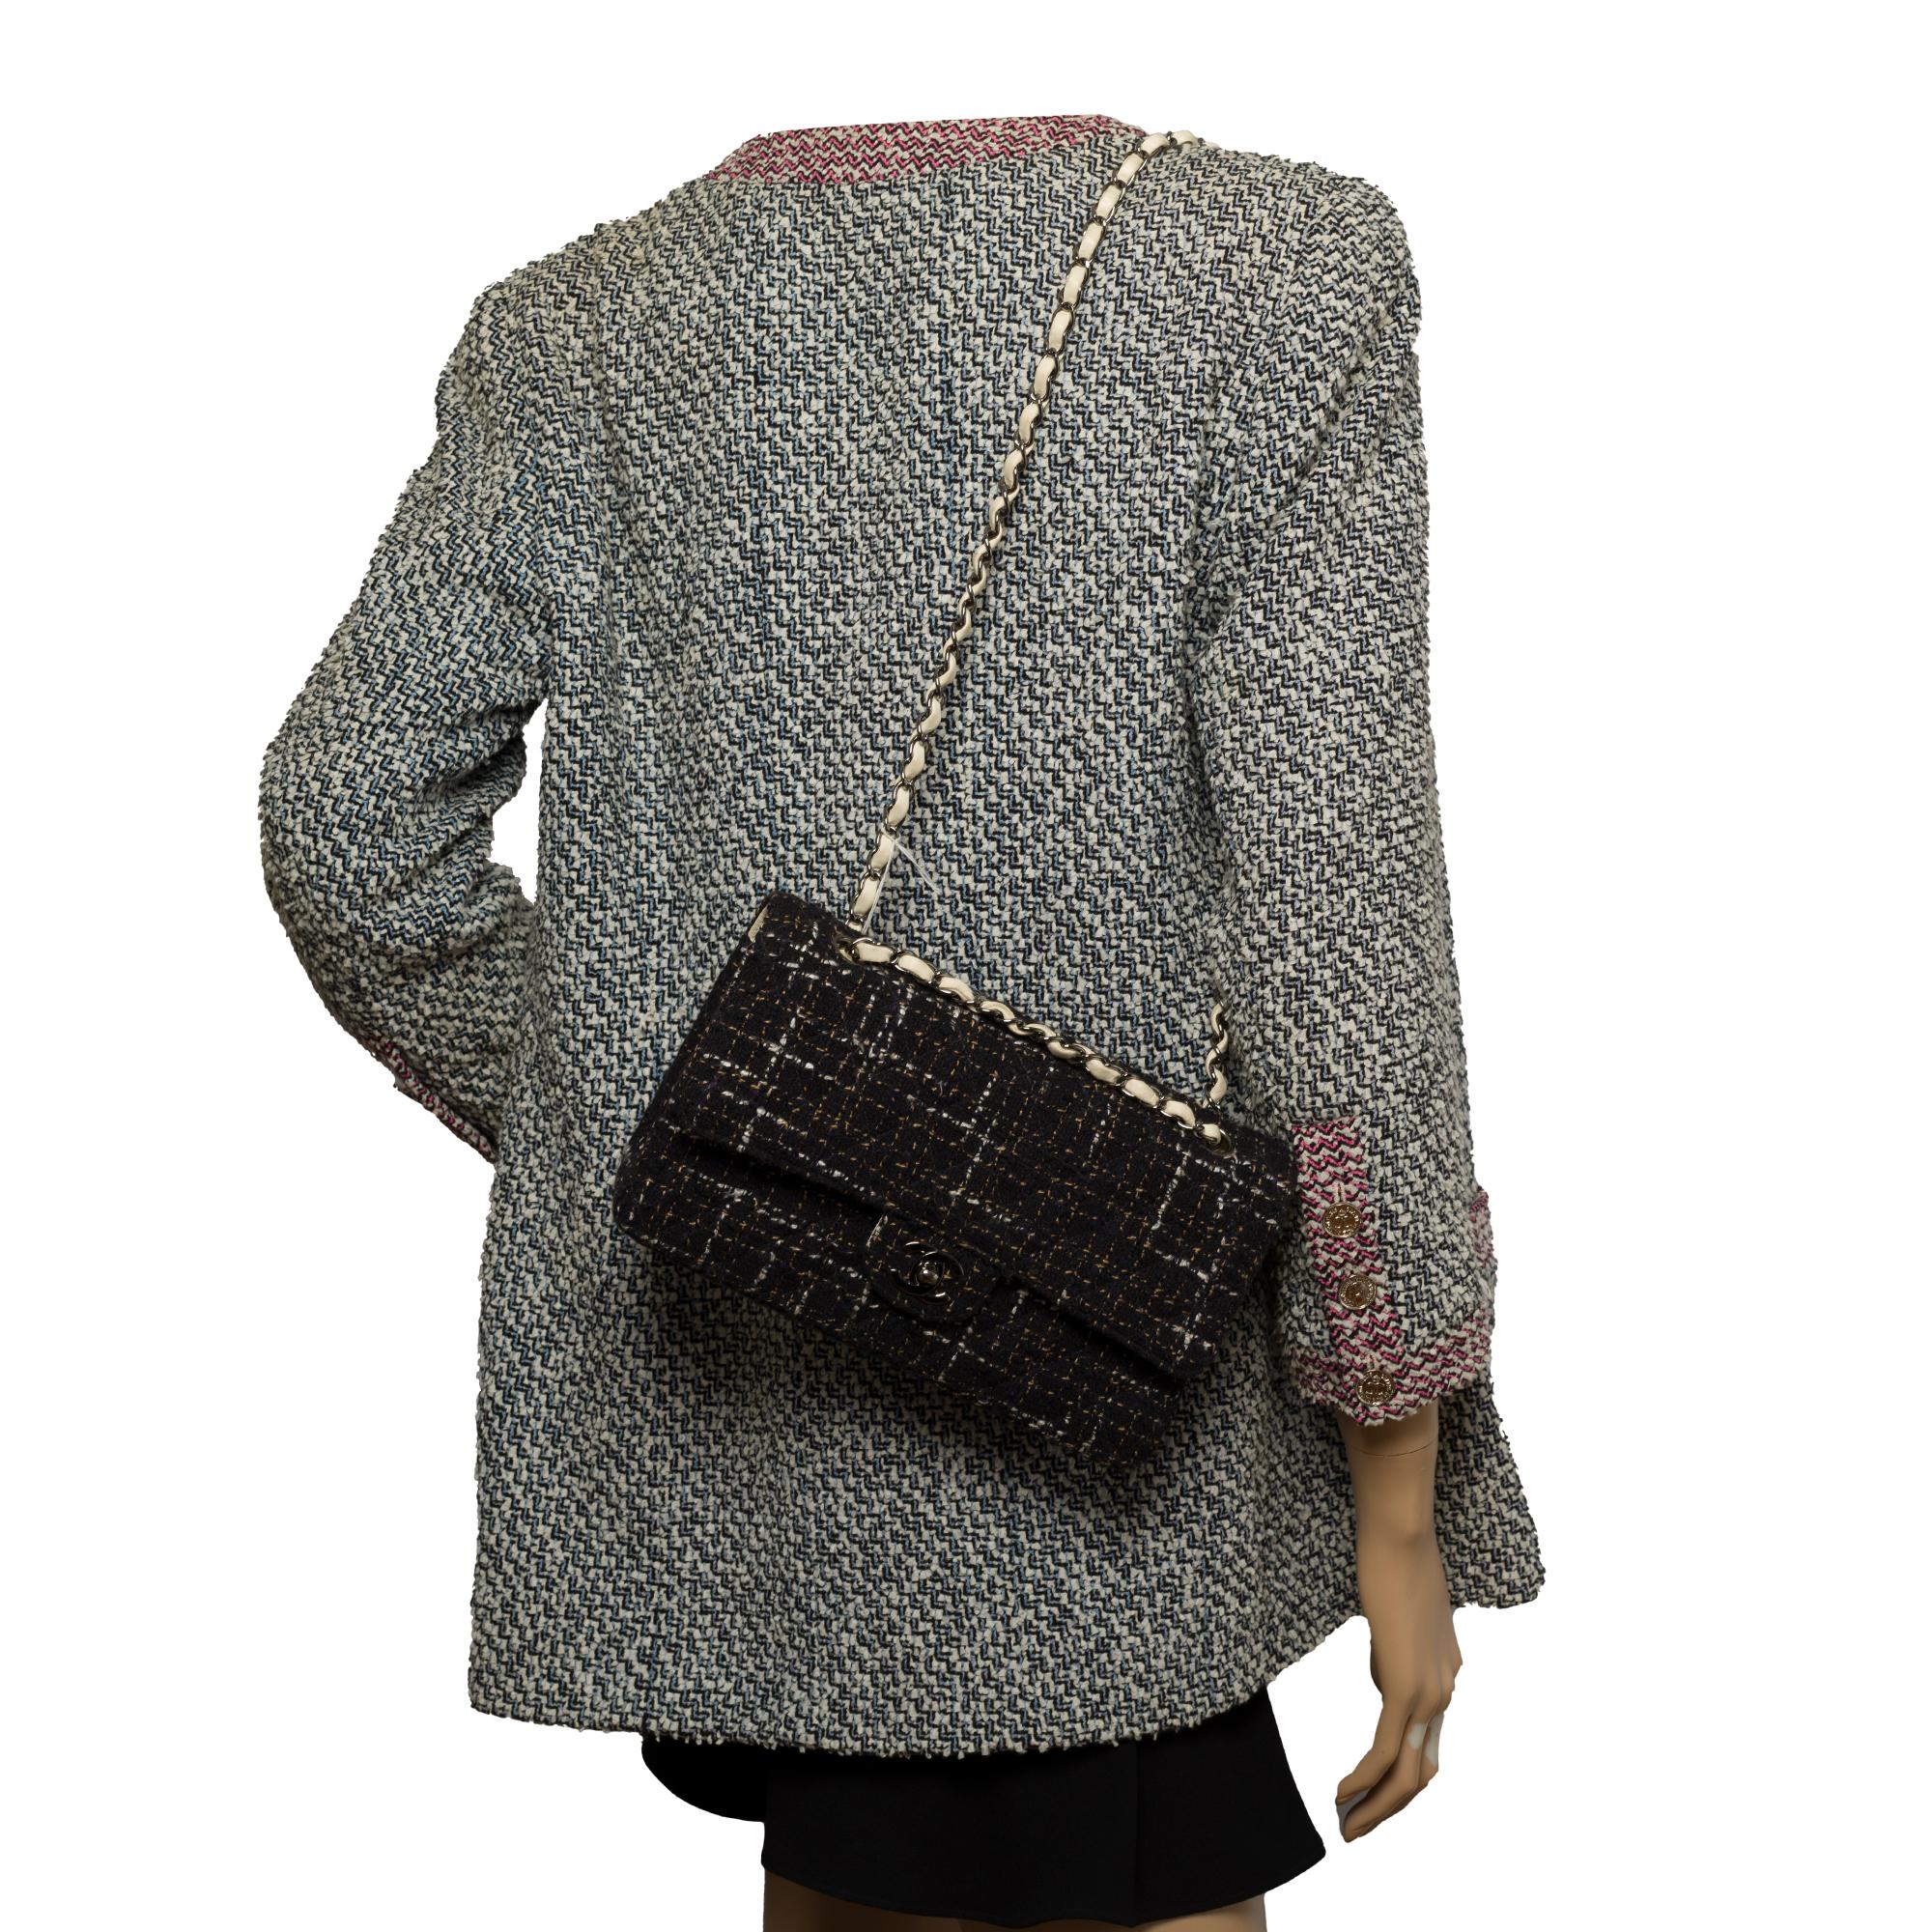 Limited Edition Chanel Timeless Shoulder bag in black & white Tweed with SHW 3